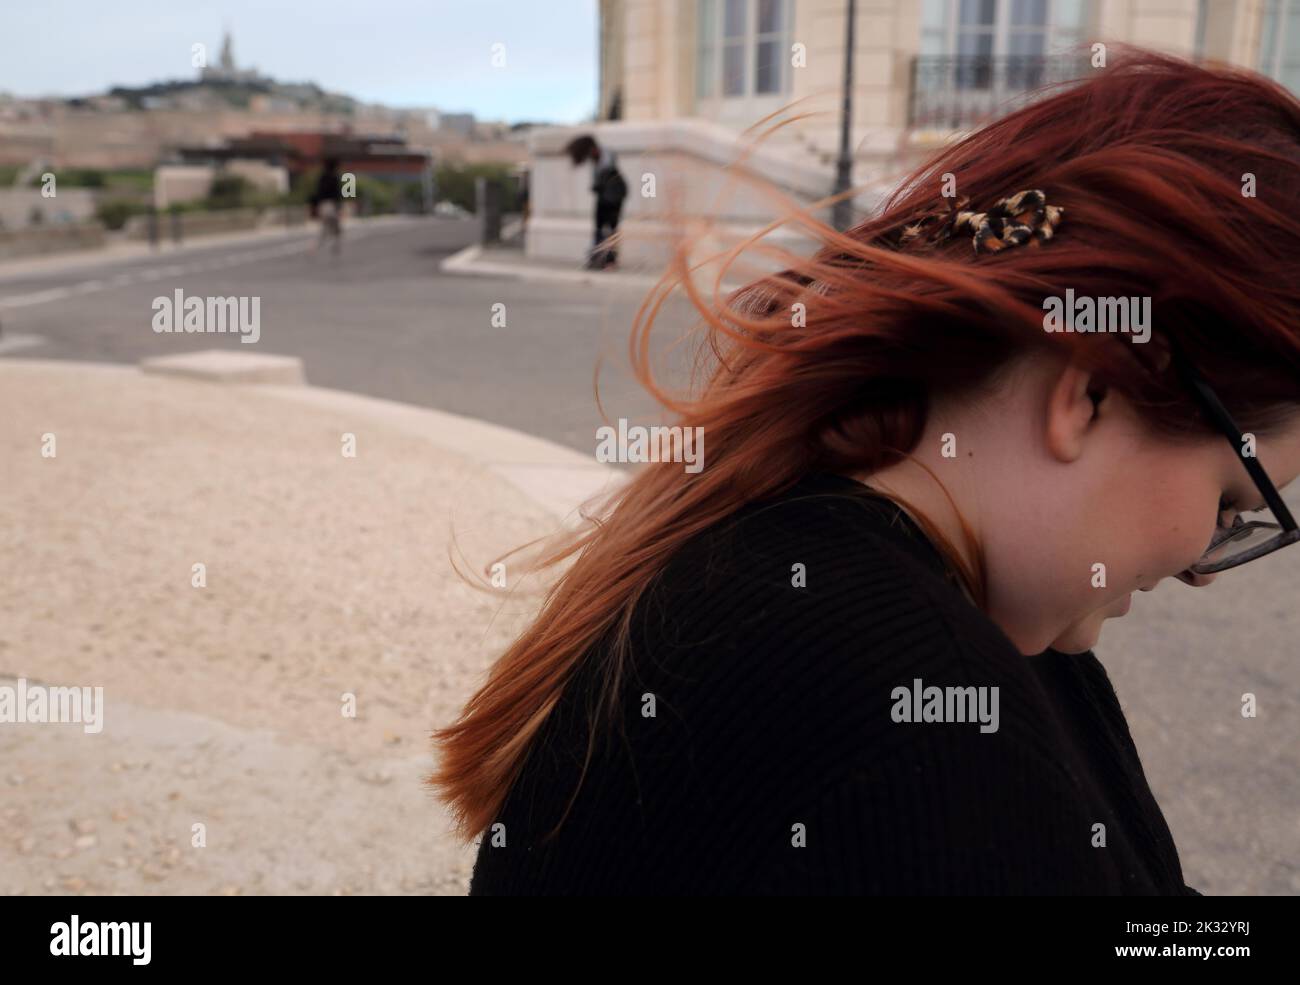 Women in her Twenties with Hair Blowing in Wind Marseille France Stock Photo